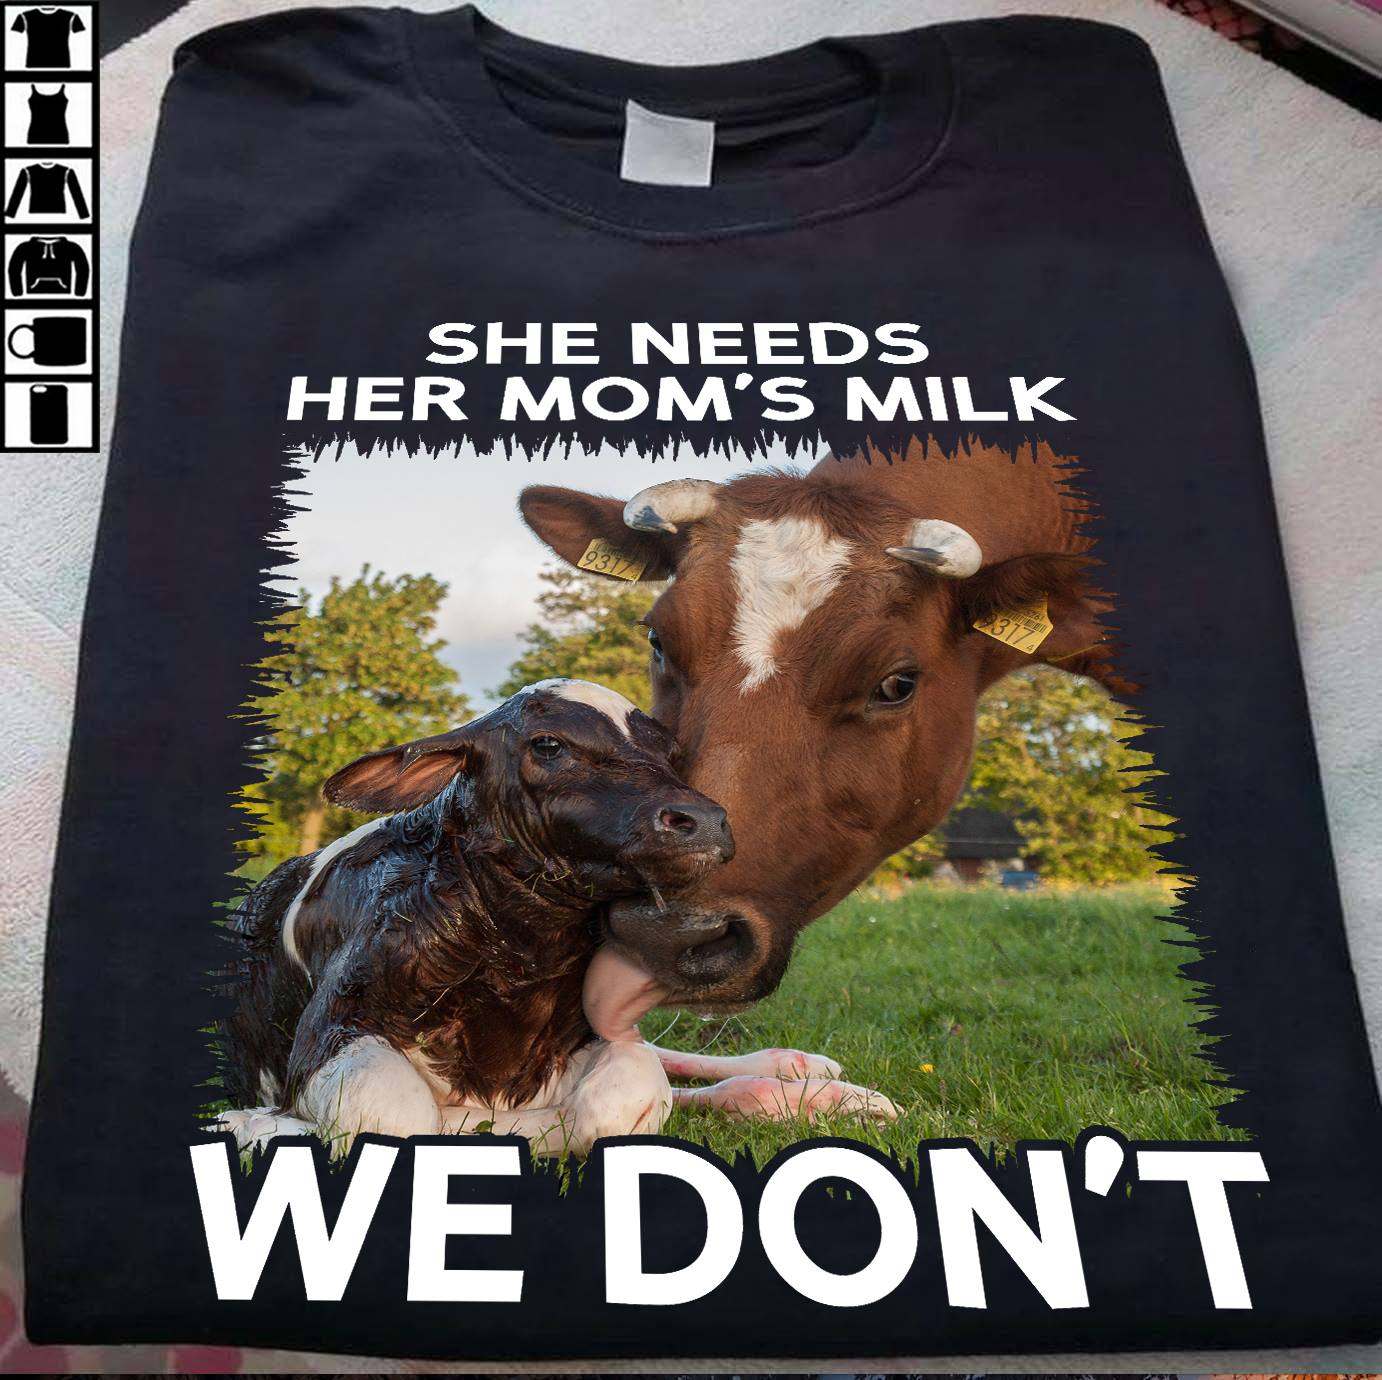 She needs her mom's milk we don't - Milk cow protection